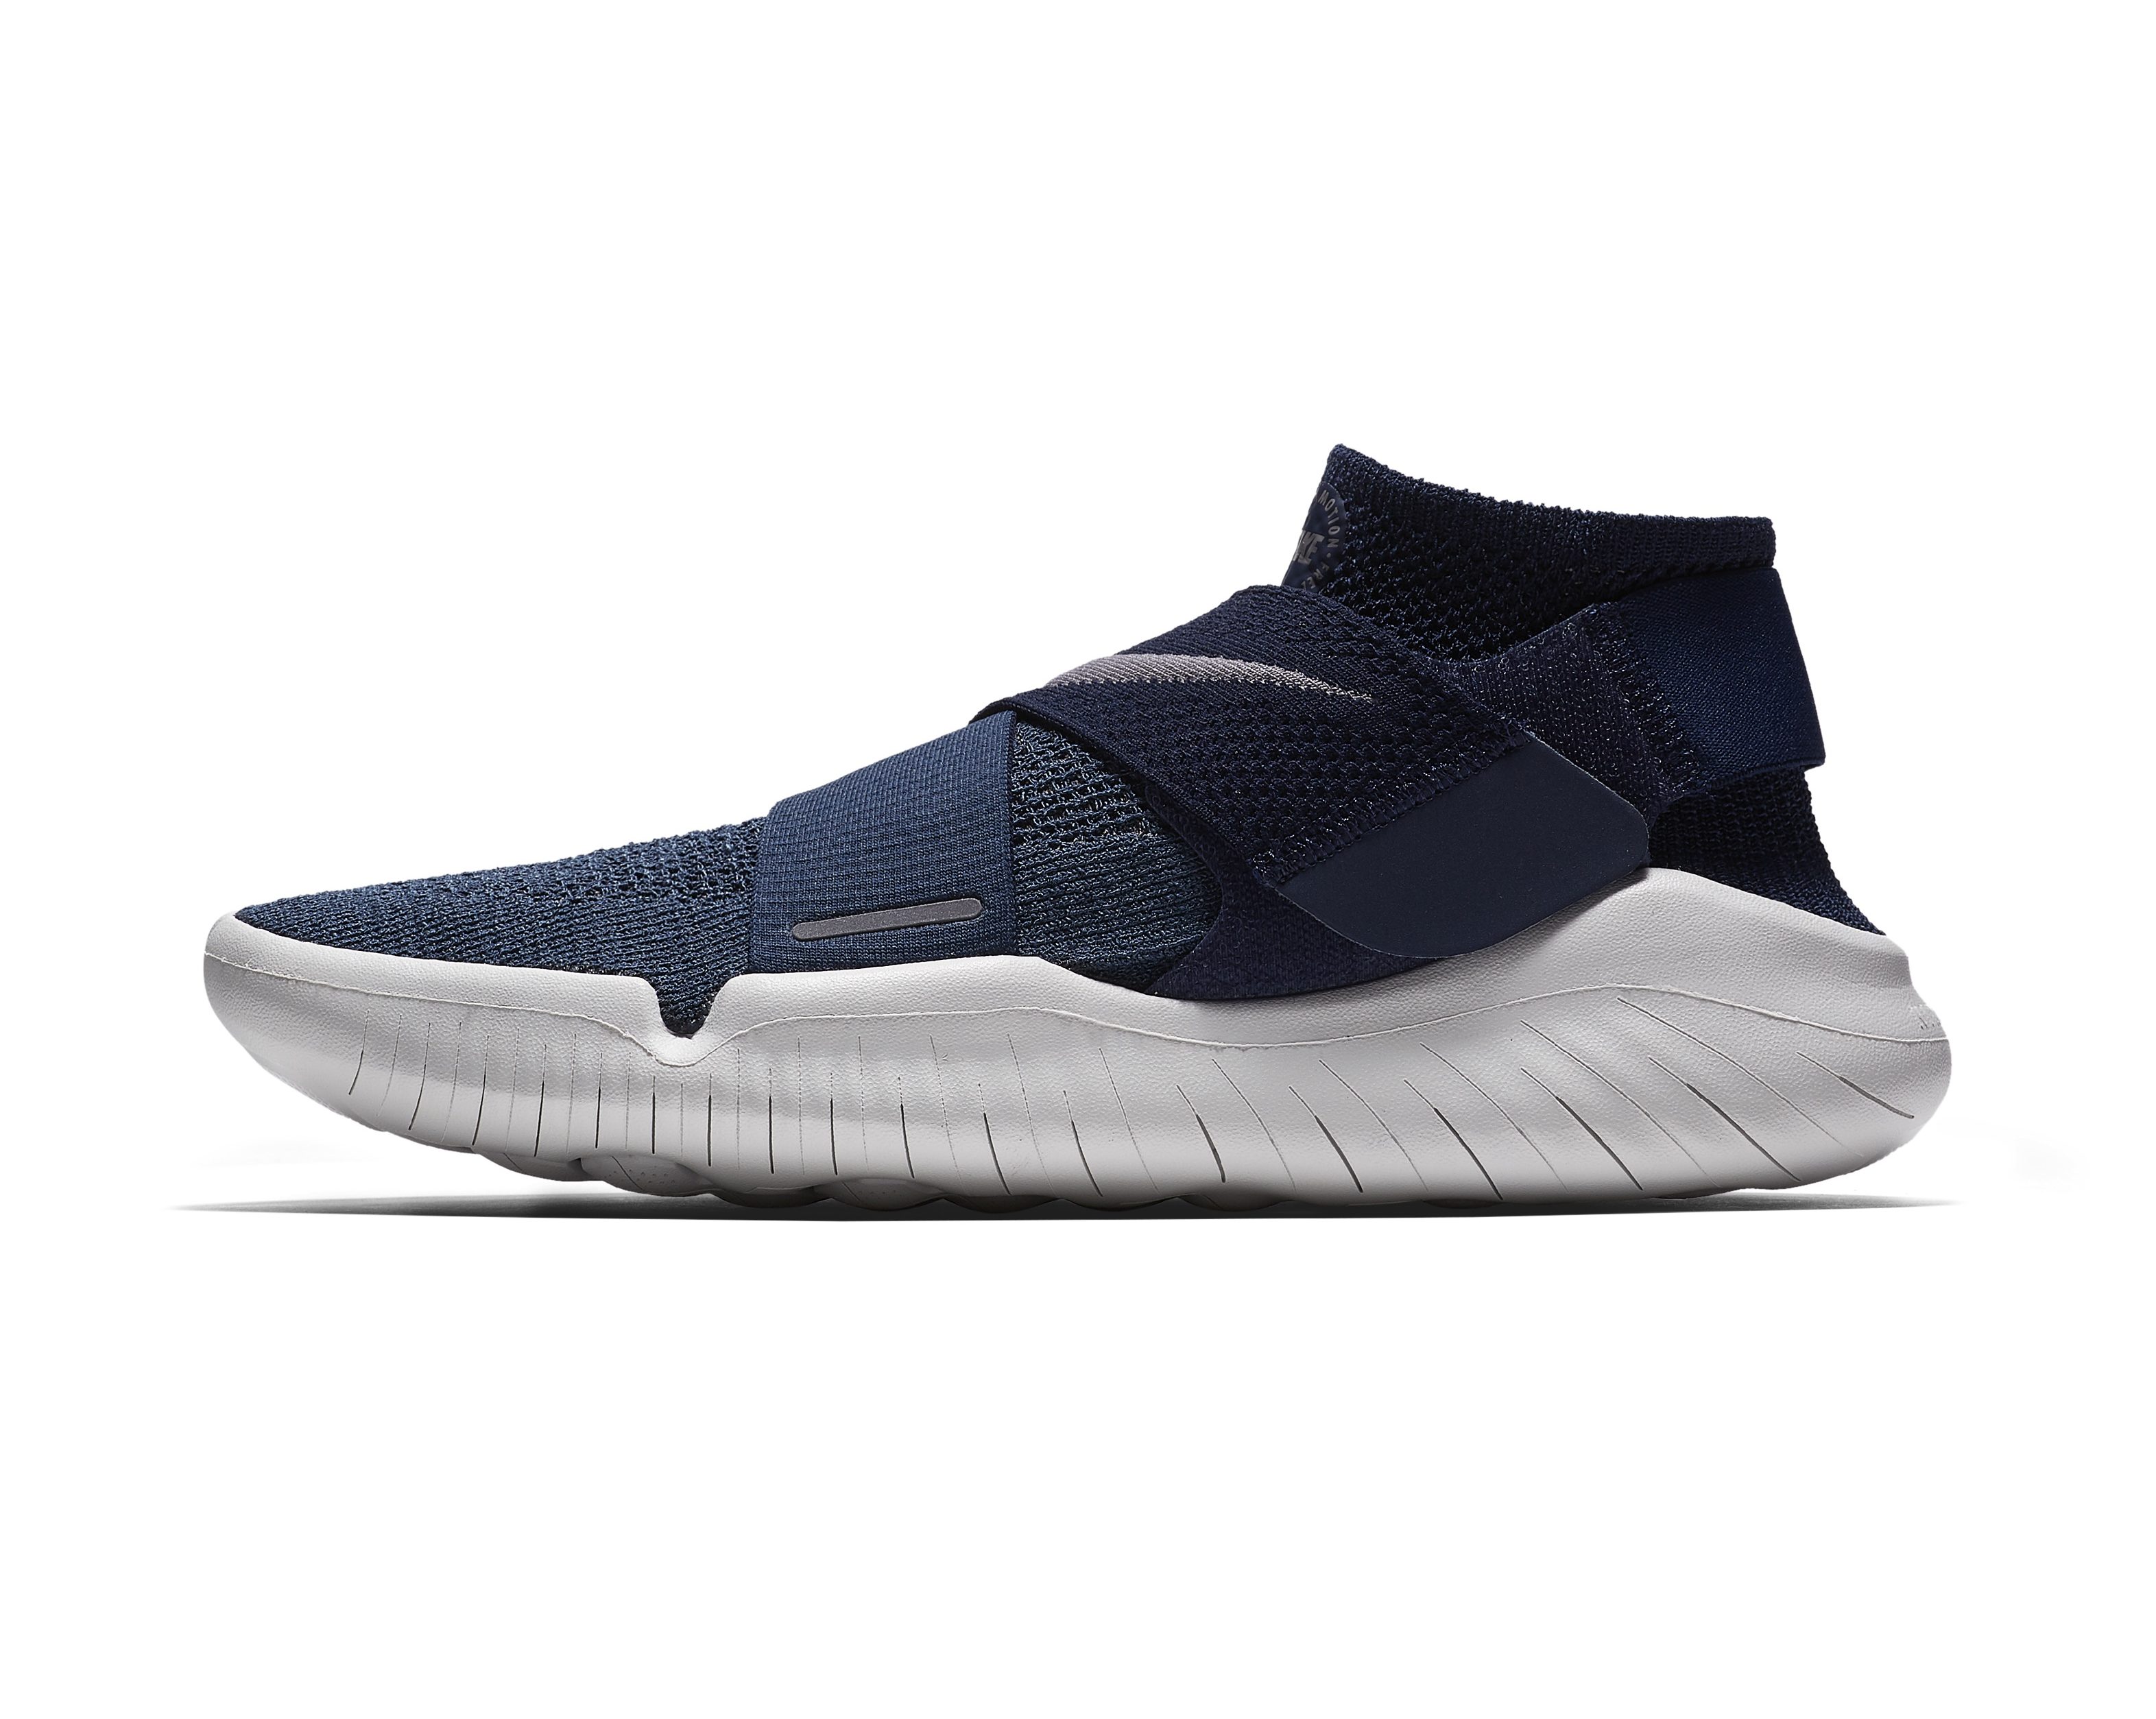 The Nike Free RN Motion 360 Uses 